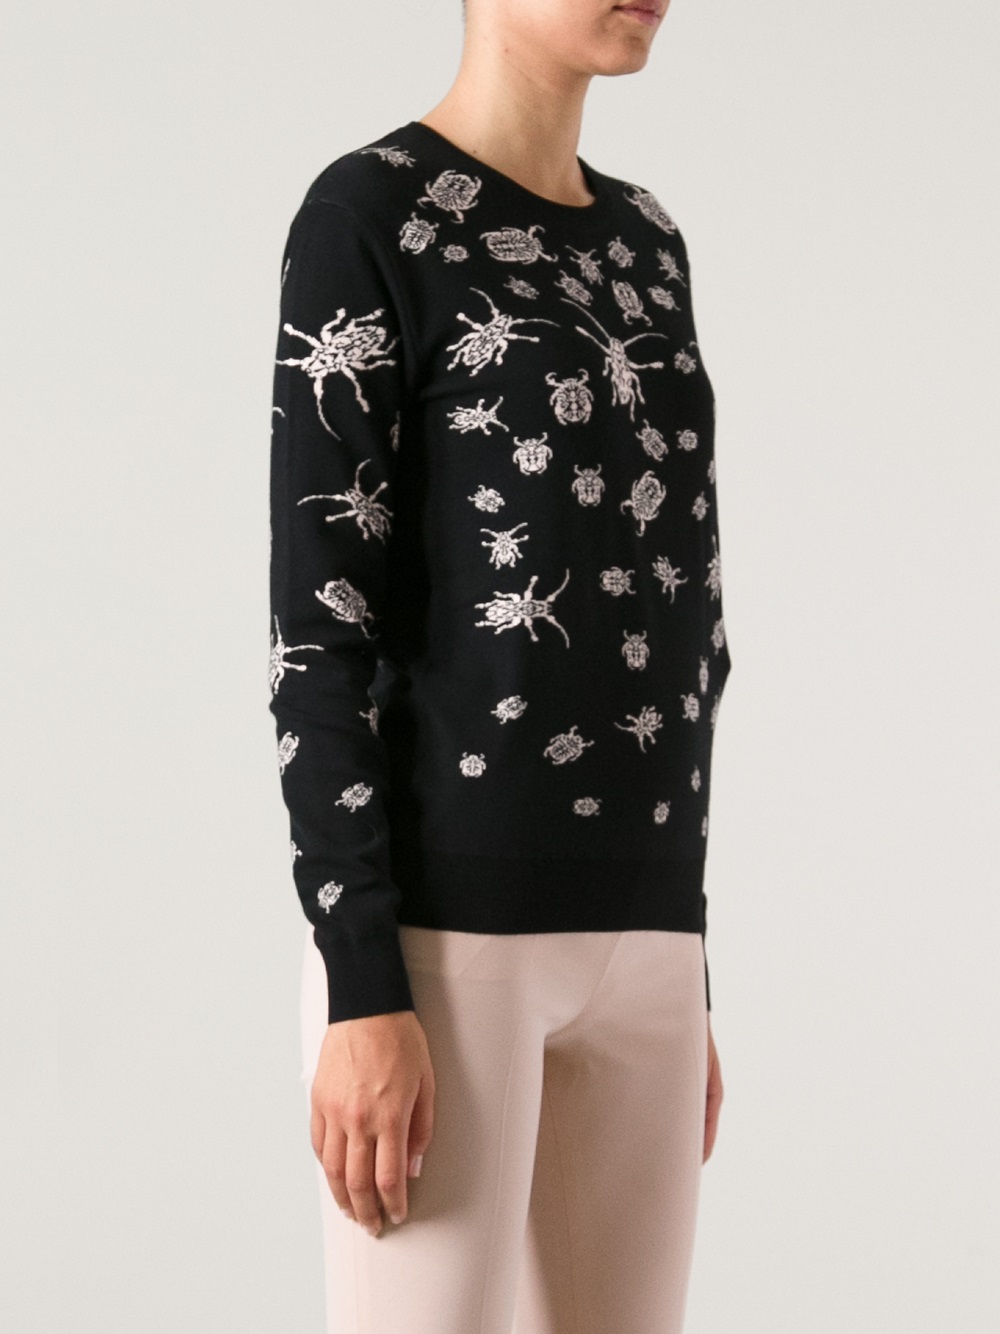 McQ Insect Print Sweater in Black - Lyst